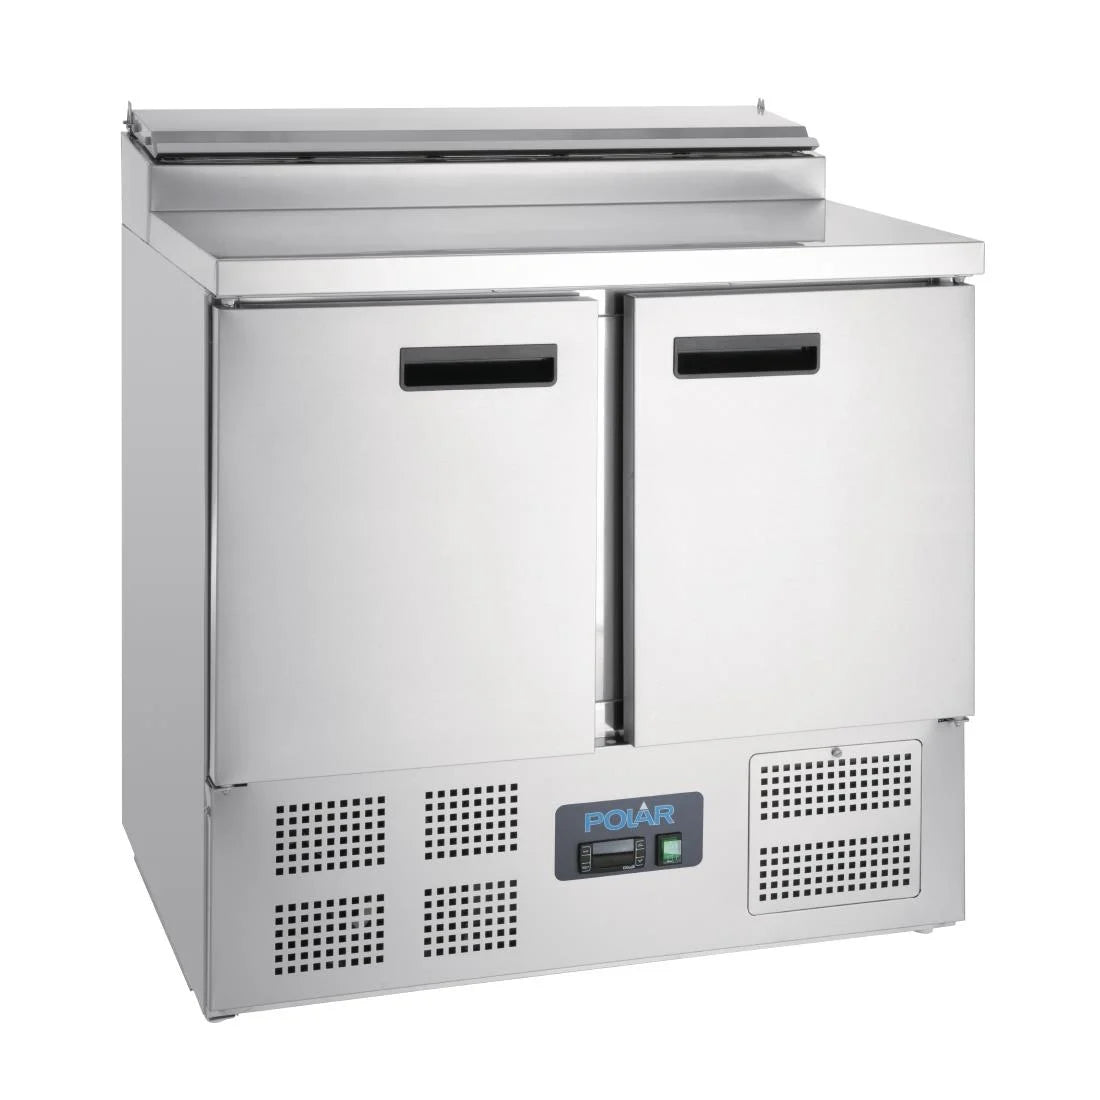 Polar G-Series Pizza Prep Counter Fridge 254Ltr.Product Ref:00588.Model: G604. 🚚 1-3 Days Delivery